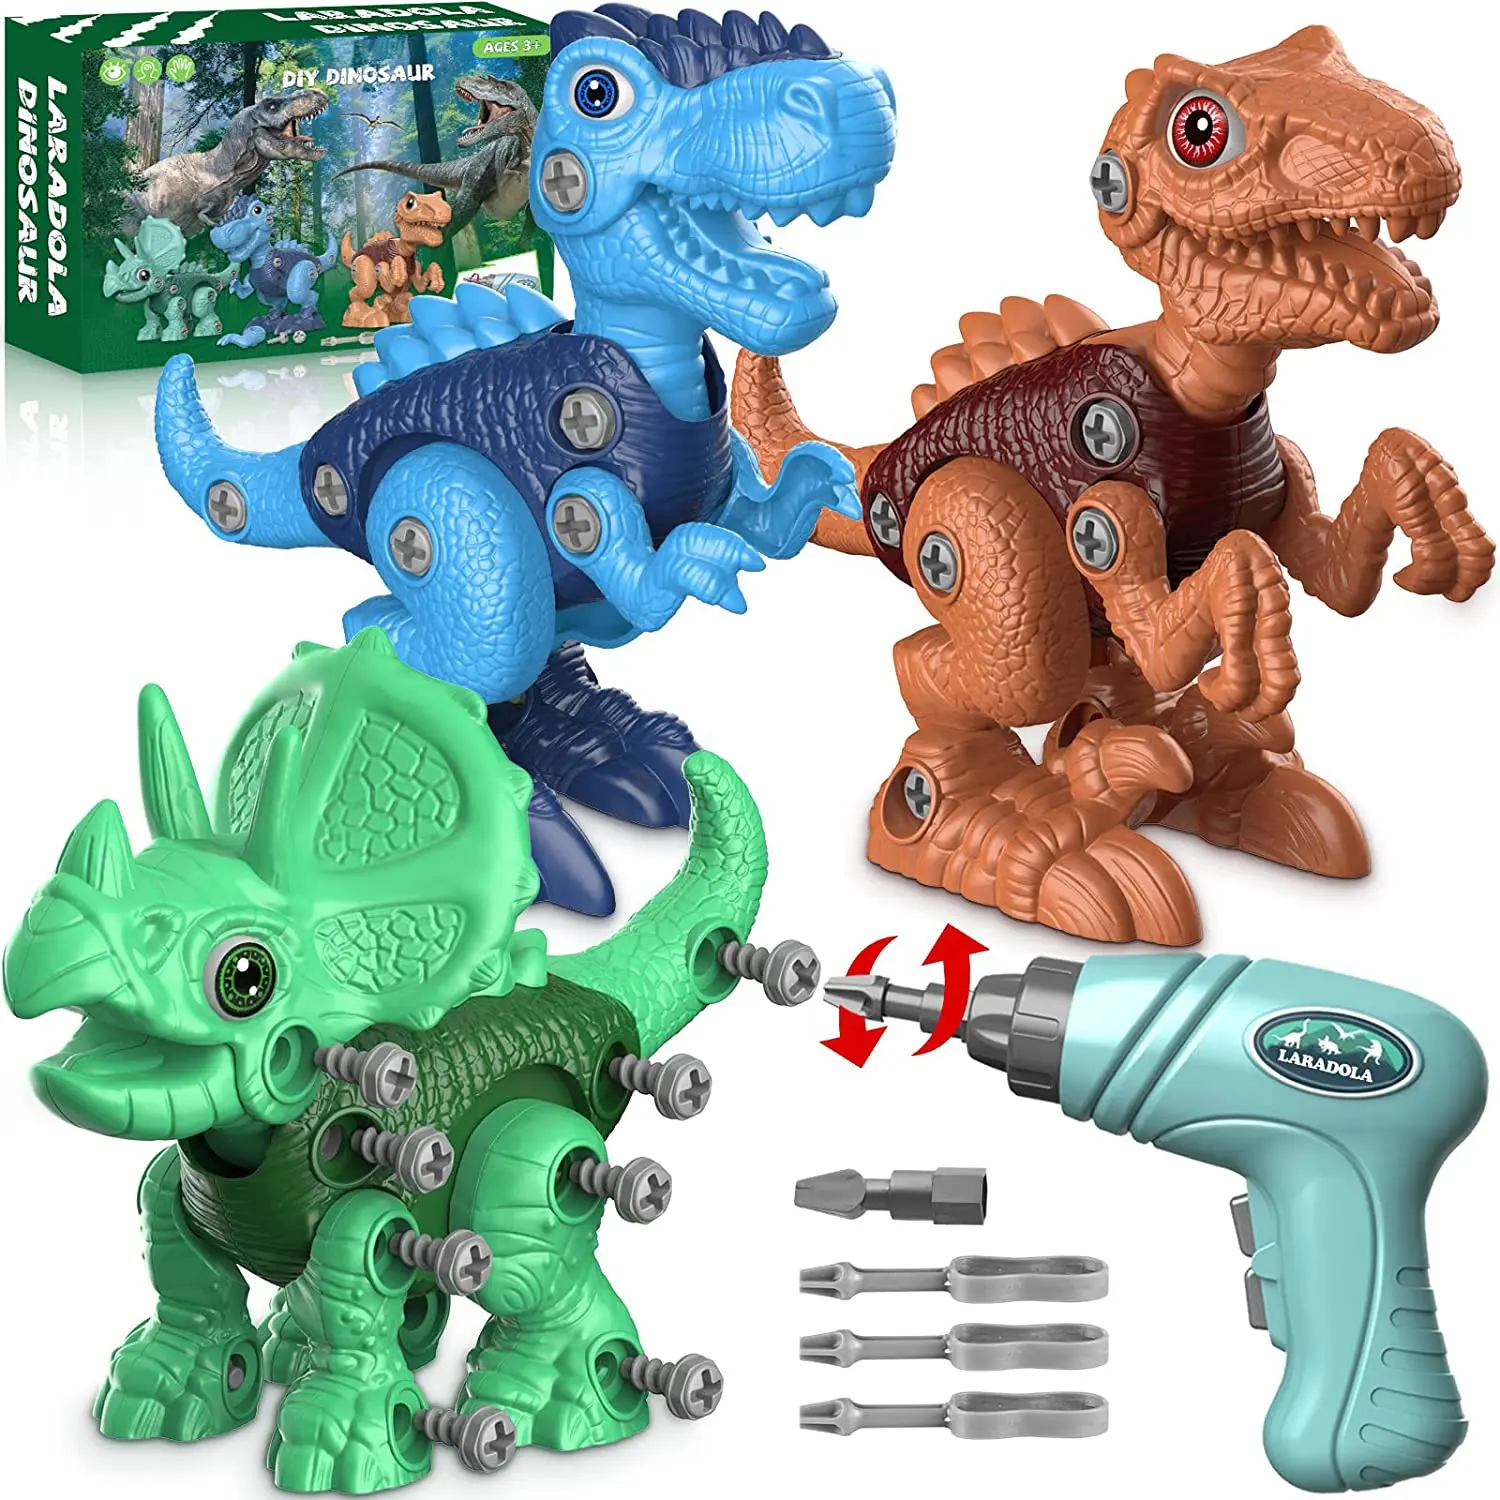 Top-selling STEM Construction Building Take Apart Plastic Dinosaur Toys with Electric Drill for Boys and Girls